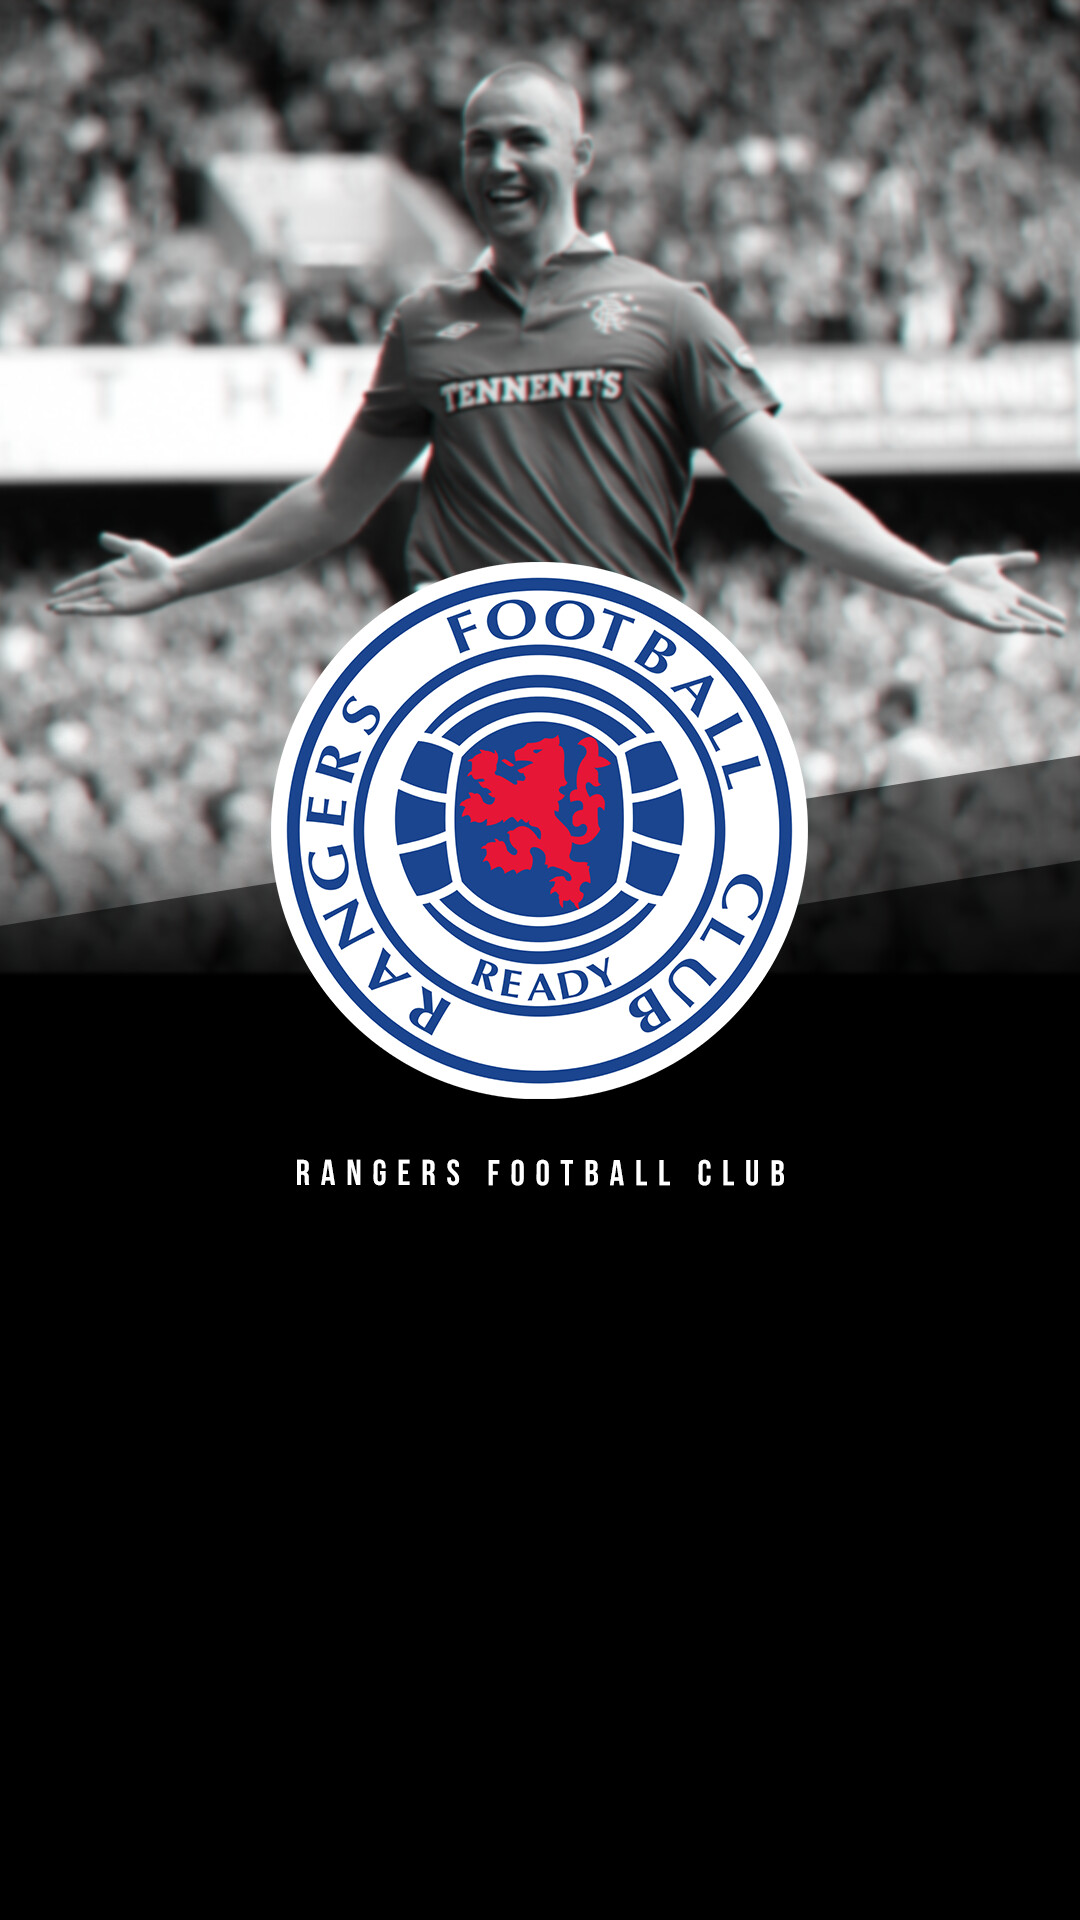 Rangers F.C.: A Scottish professional football club based in the Govan district of Glasgow. 1080x1920 Full HD Background.